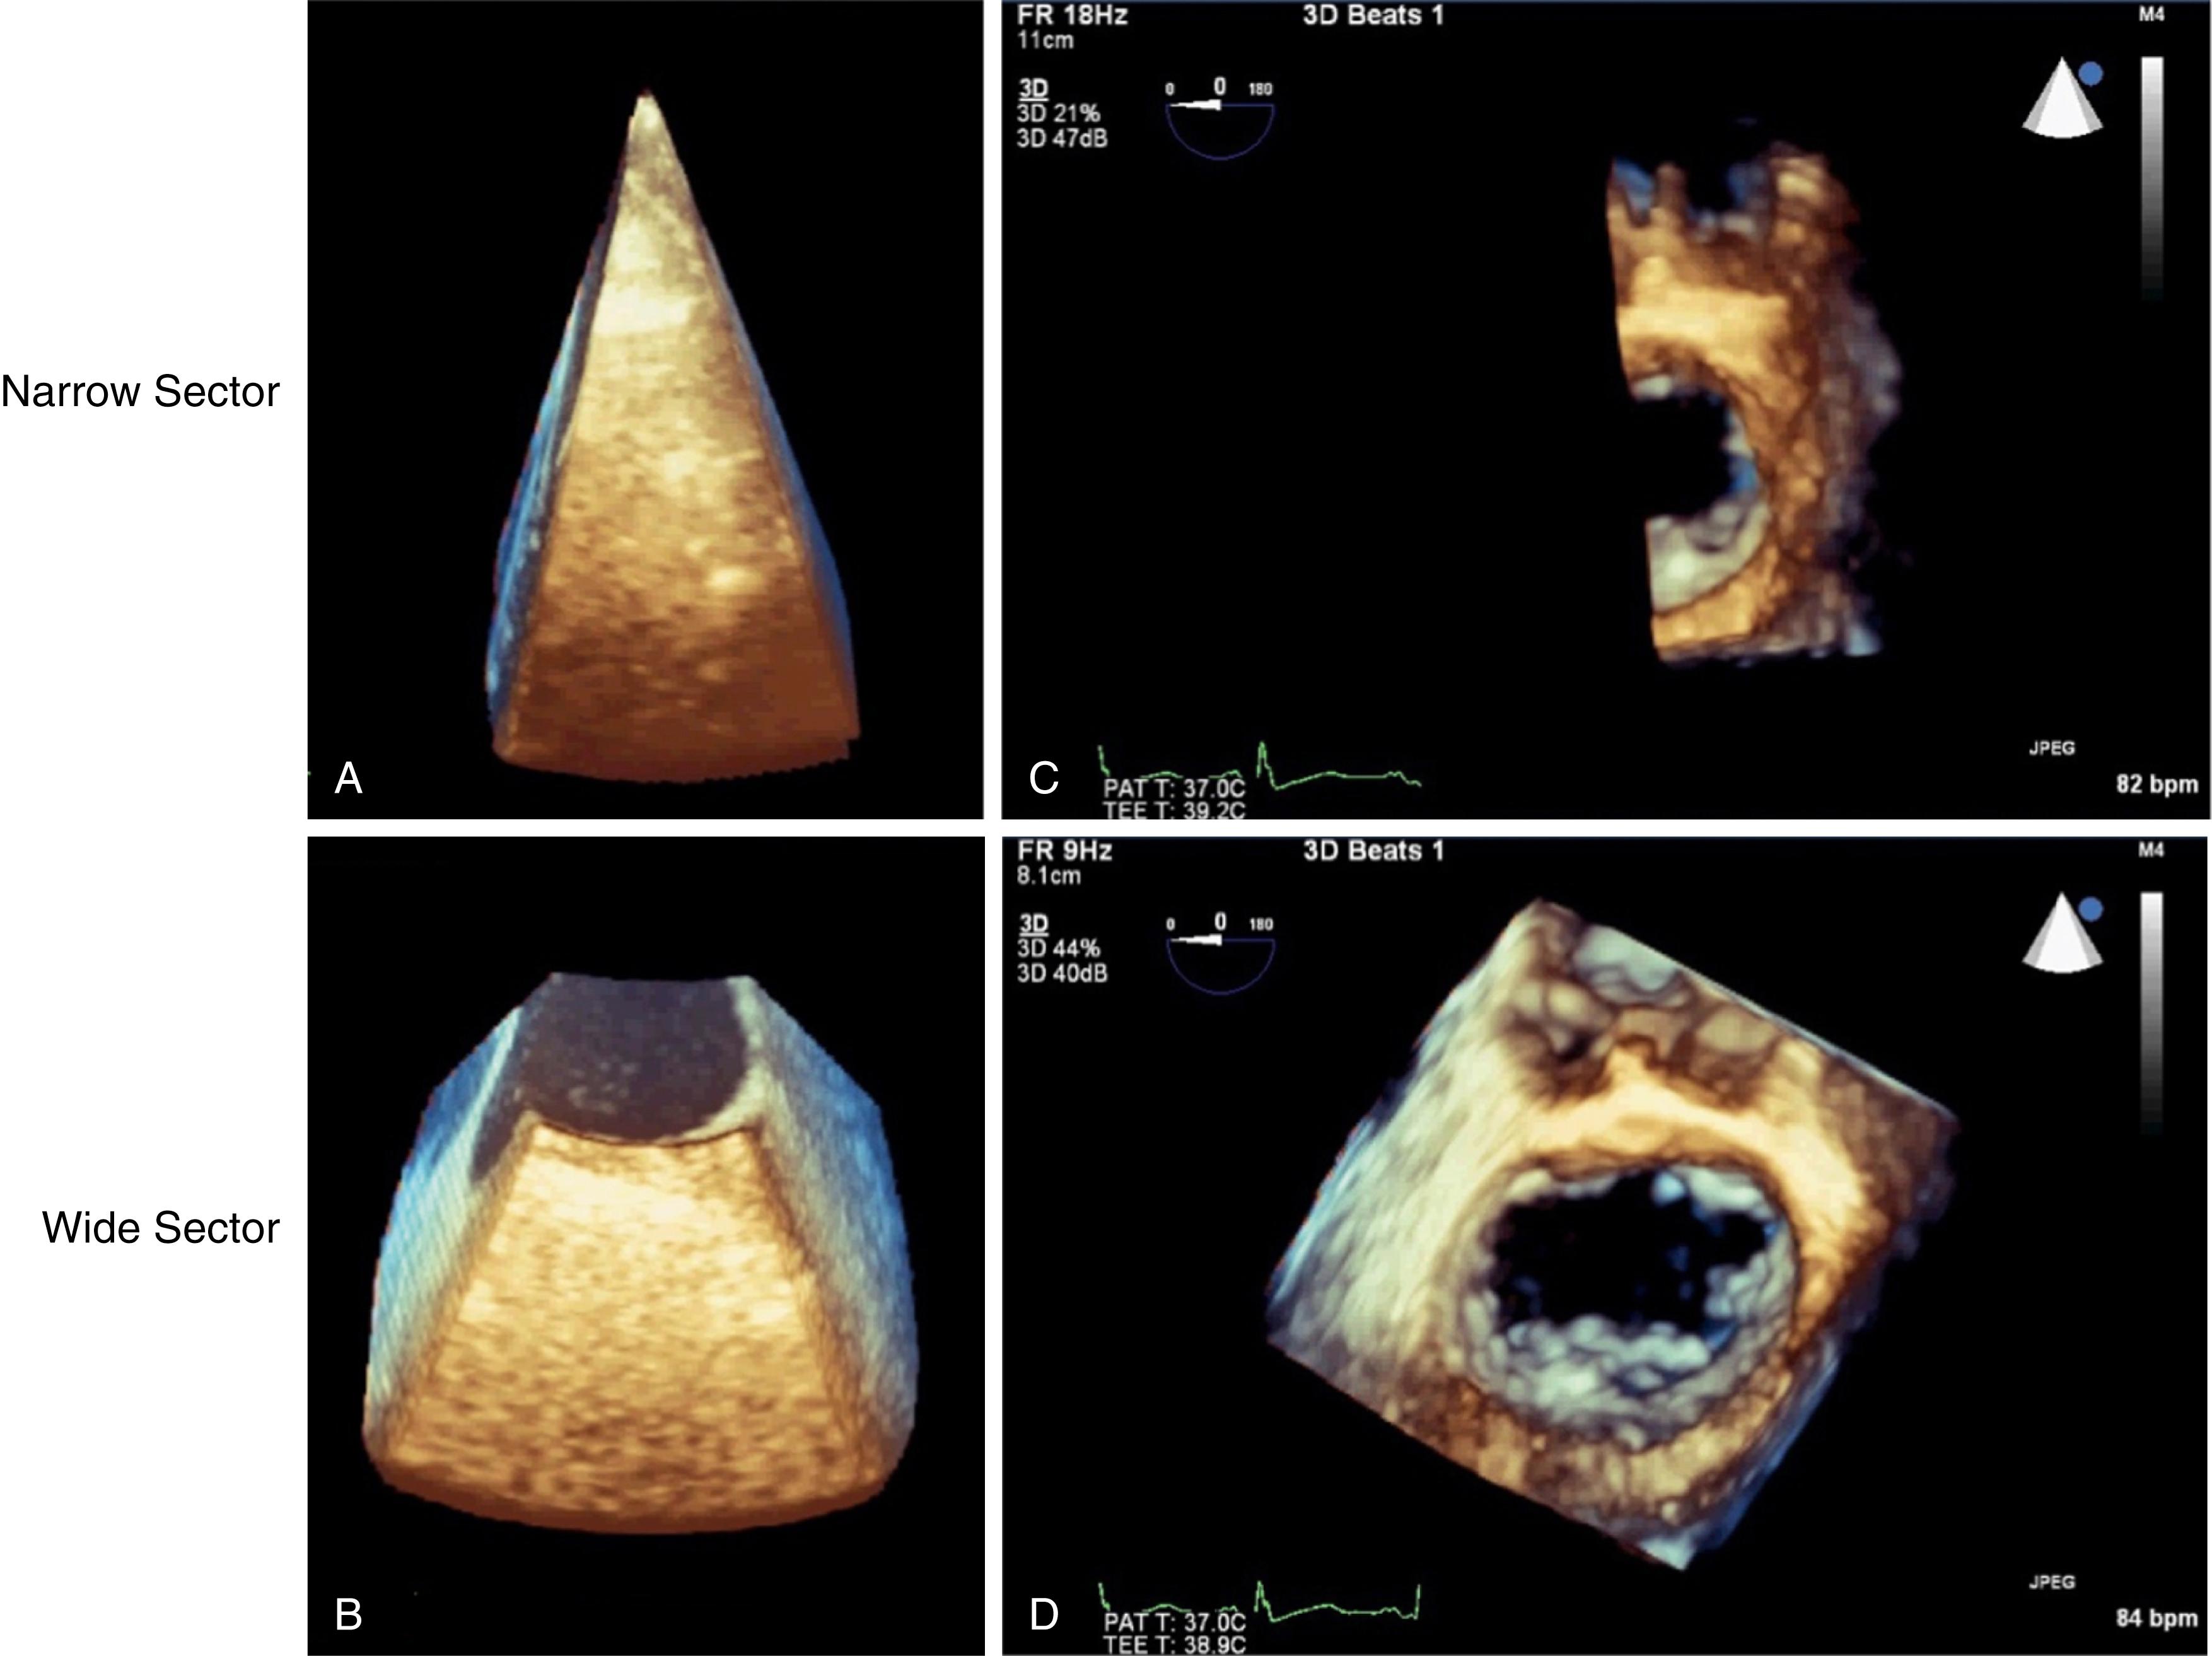 Fig. 37.3, Real-time three-dimensional imaging using narrow sector (top) and wide sector (bottom) modes. (A) Narrow sector imaging displays a narrow, pyramidal volume. (B) Wide sector imaging displays a defined region of interest selected from a larger pyramidal volume. (C) Narrow sector image of the mitral valve after cropping and rotating. Only a portion of the mitral valve structure is visualized. (D) Wide sector image of the mitral valve after cropping and rotating. The entire mitral valve structure is visualized, but at the expense of decreased spatial and temporal resolution.